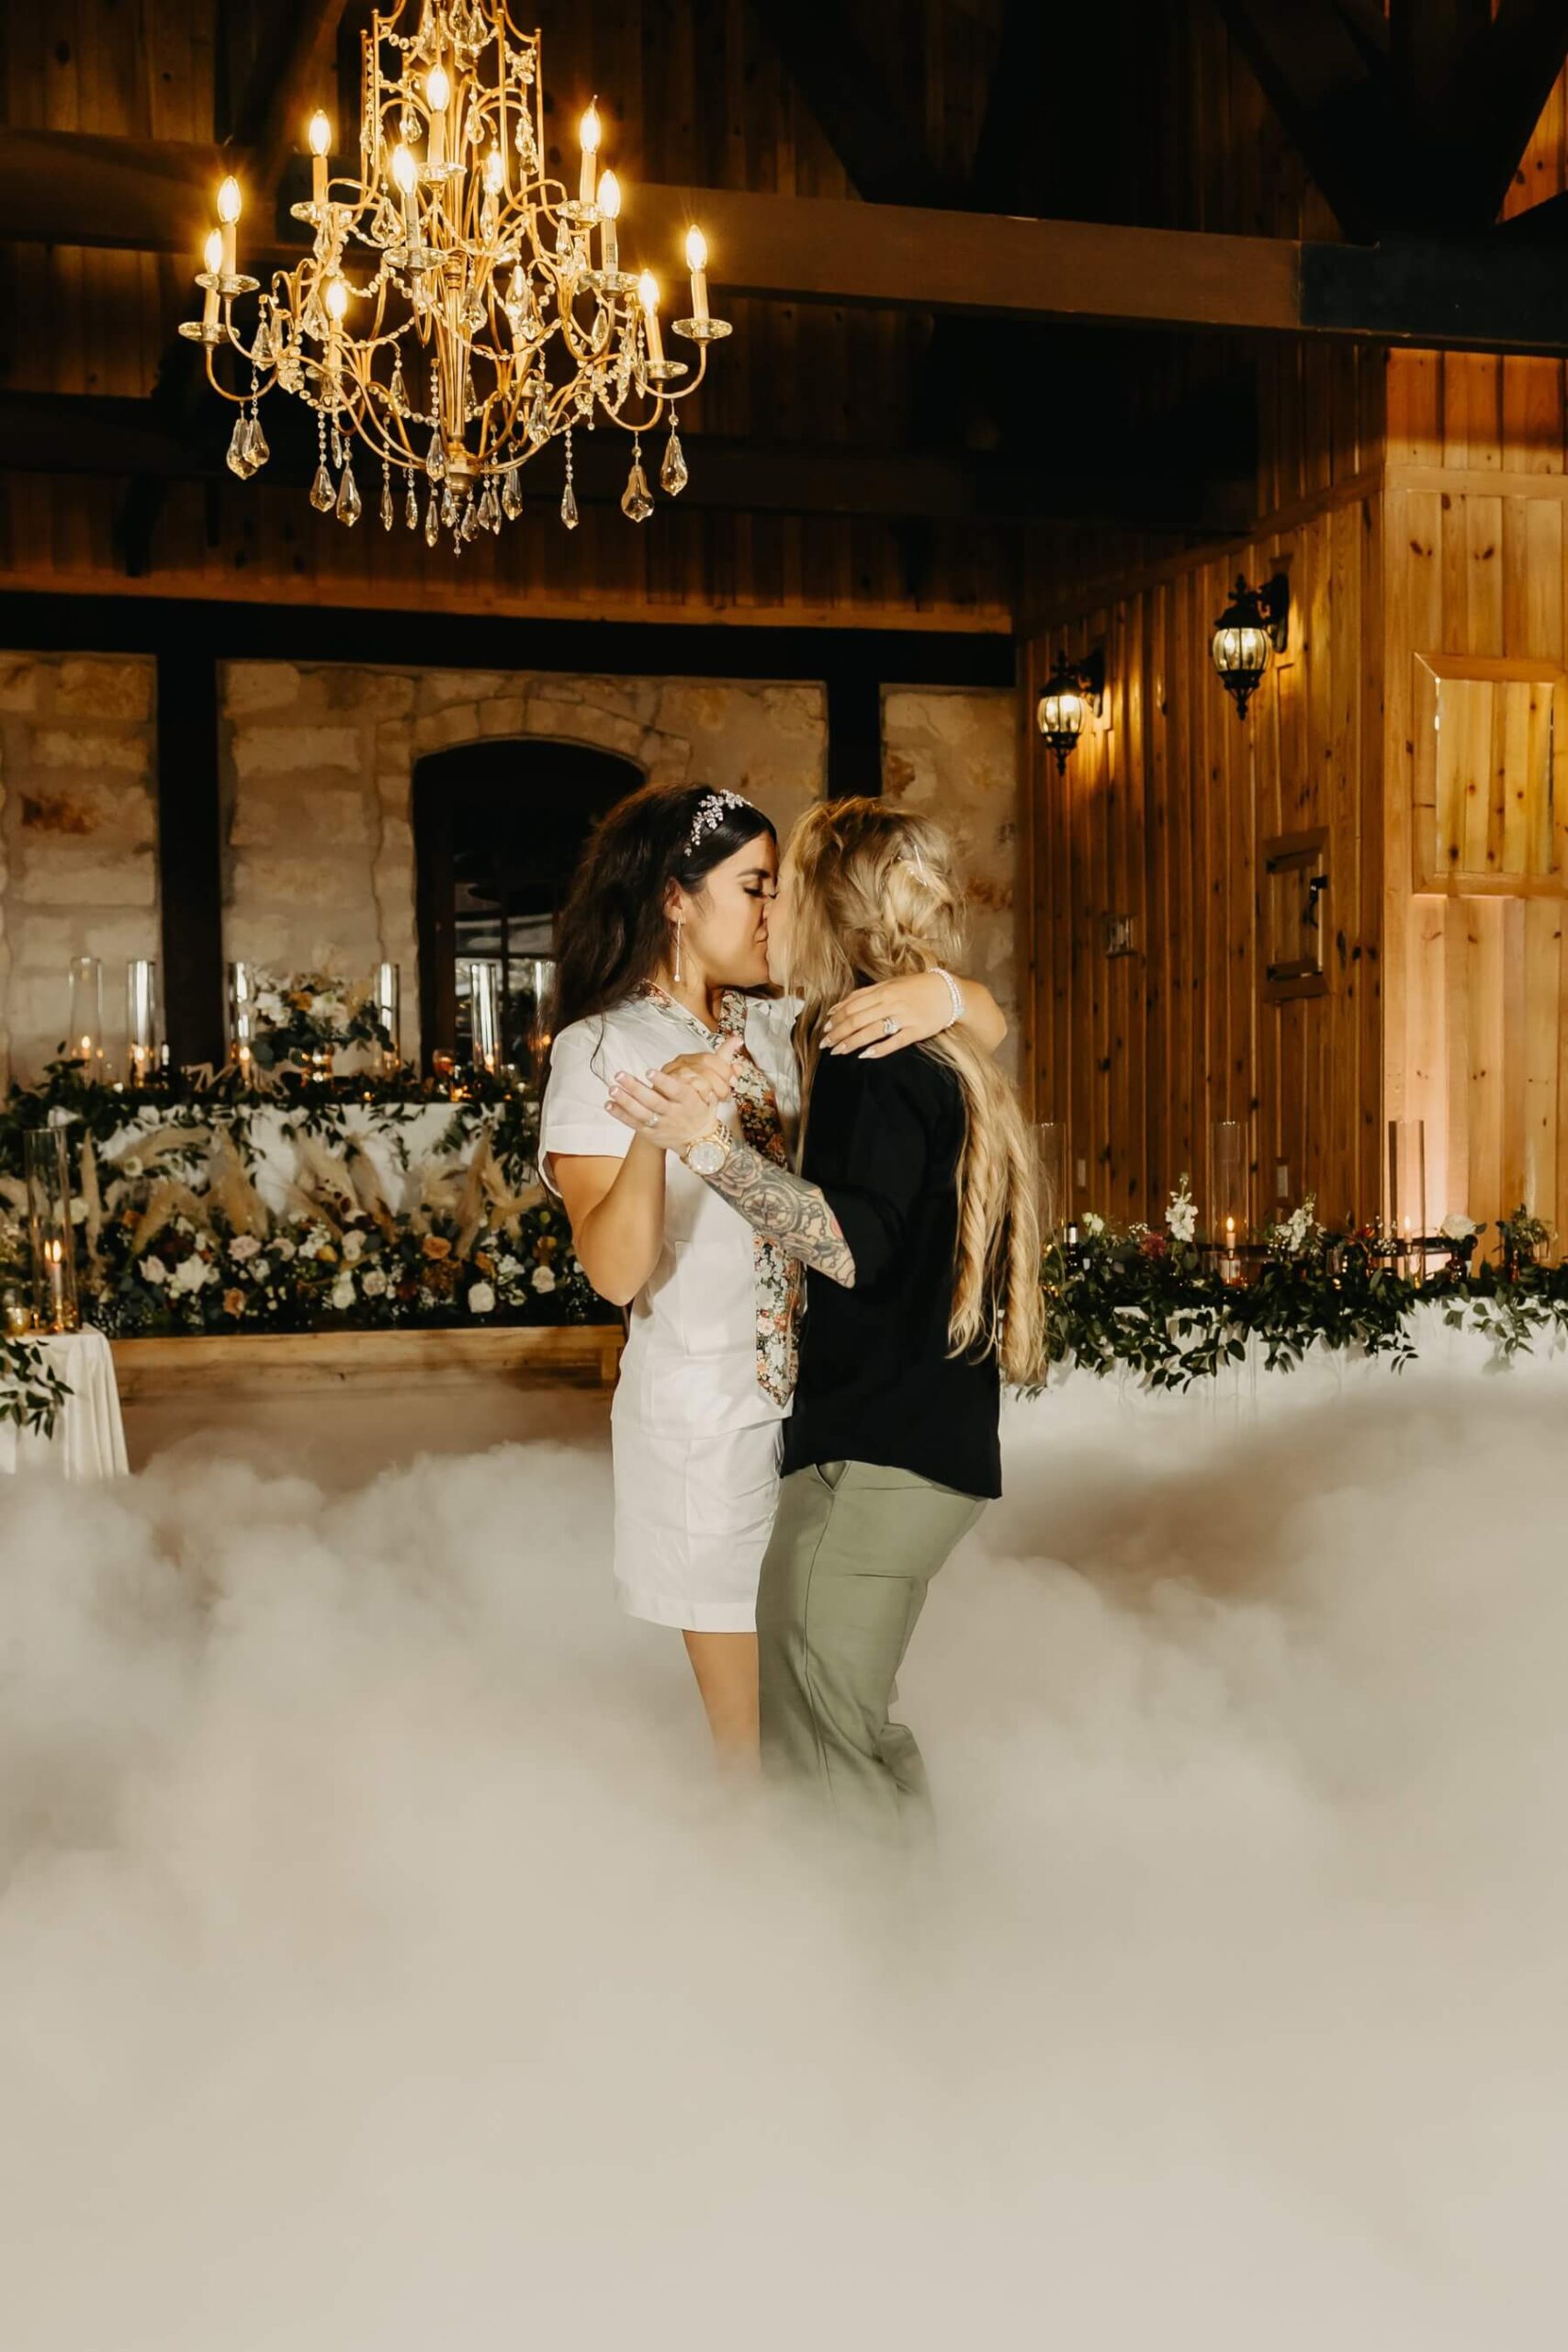 Couple having private last dance with fog machine